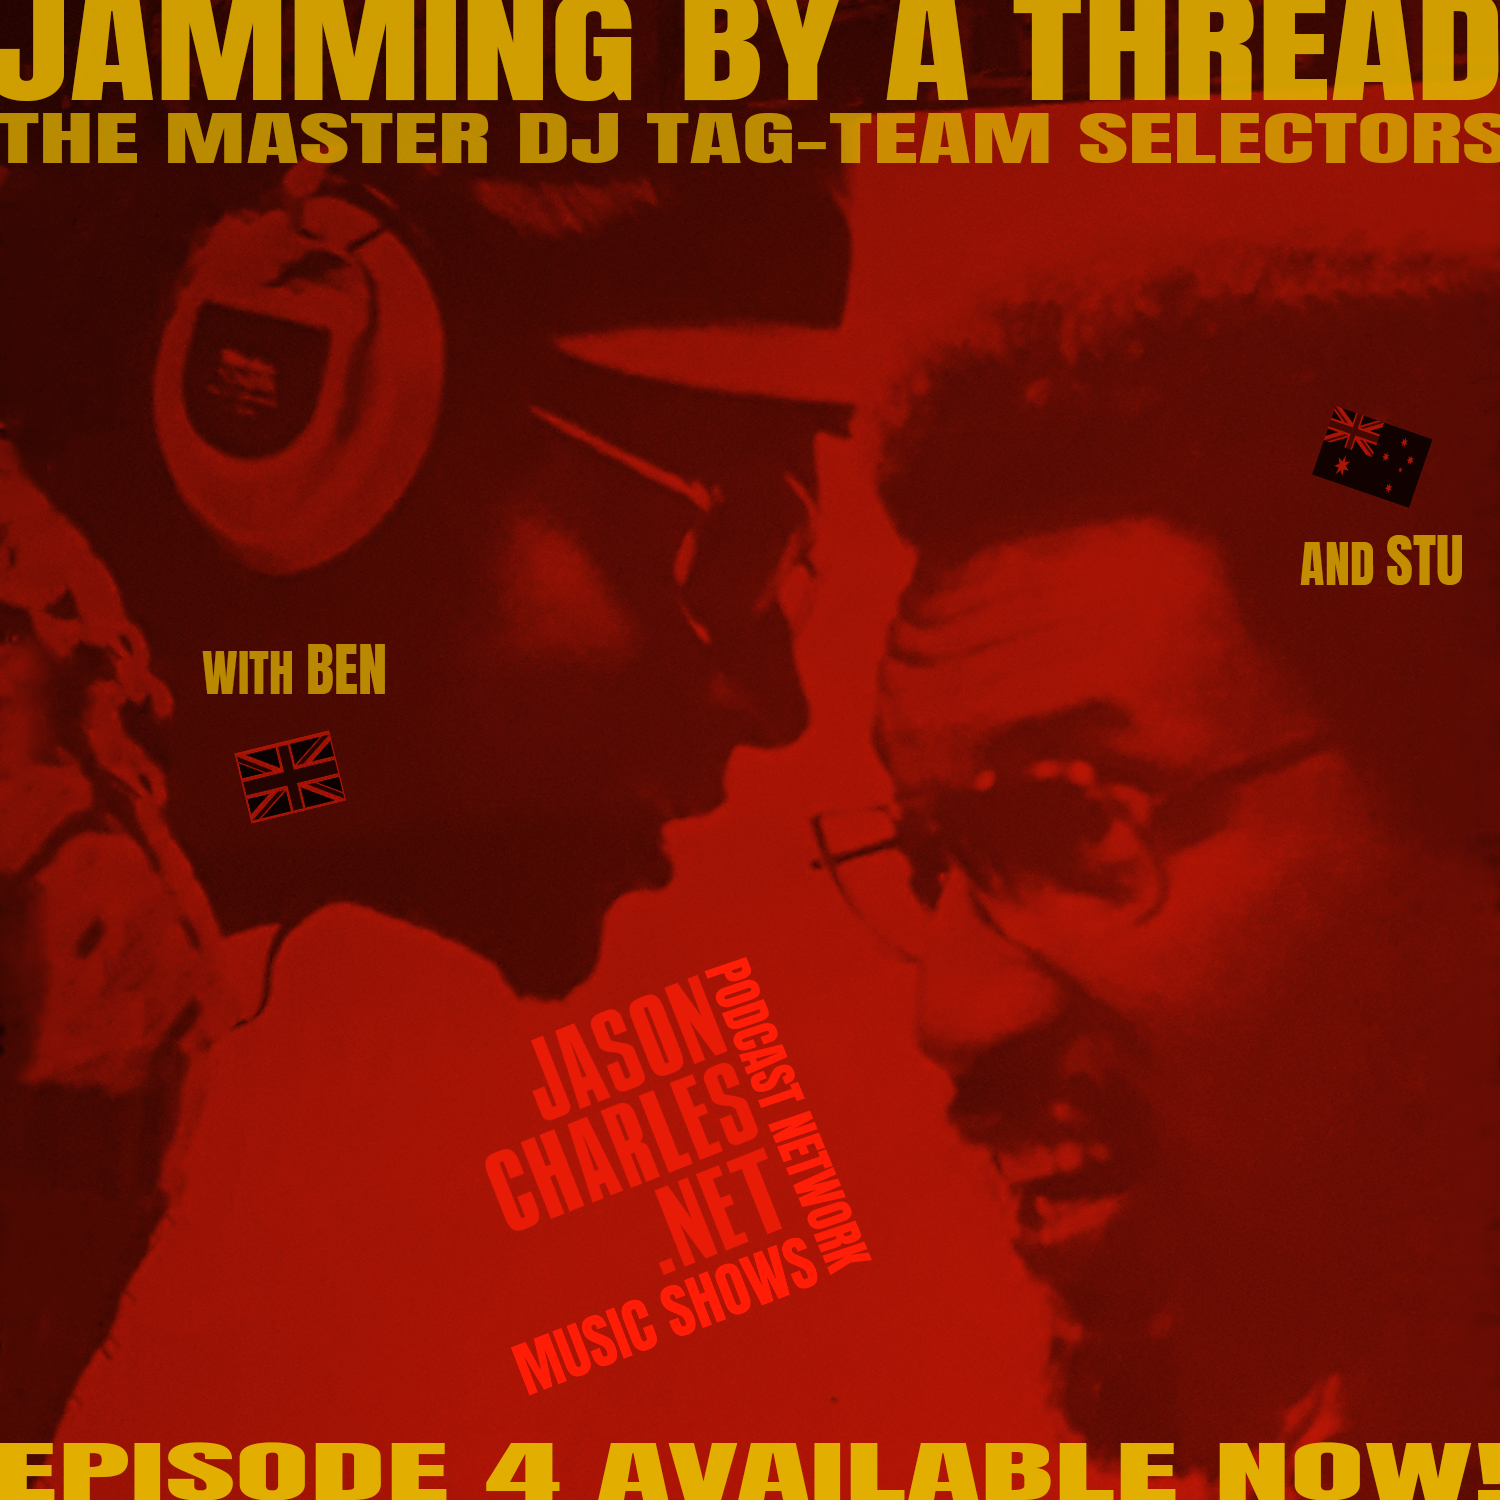 JAMMING BY A THREAD Episode 4 London Hip-Hop Takeoff